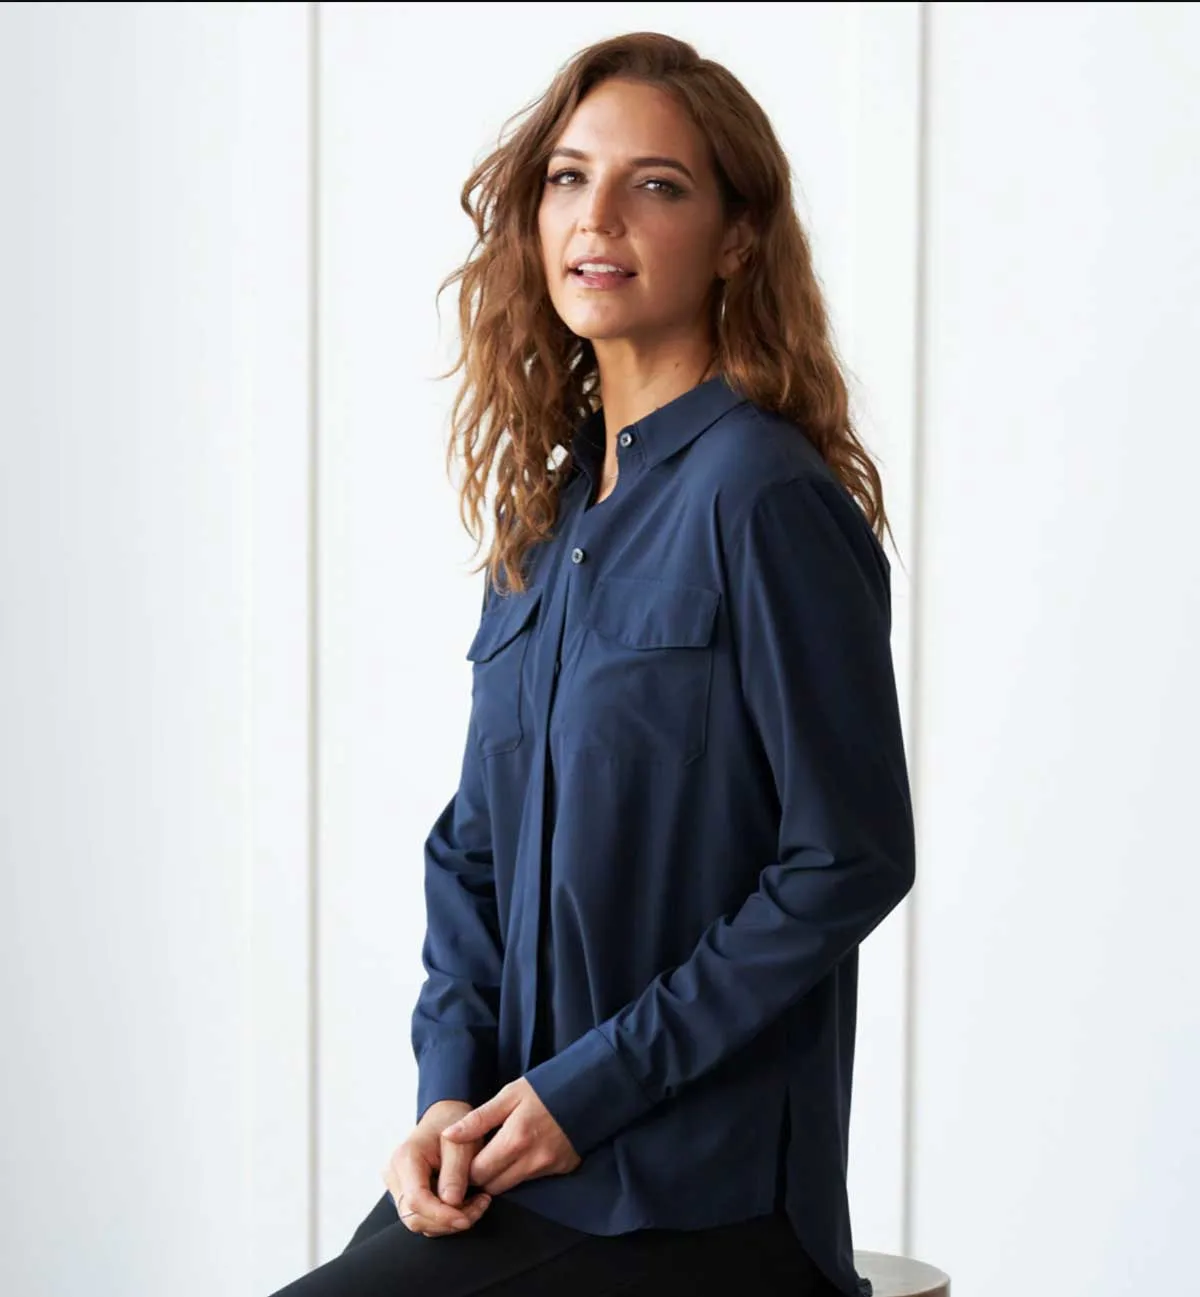 Attractive brown haired woman modelling a navy travel shirt. 